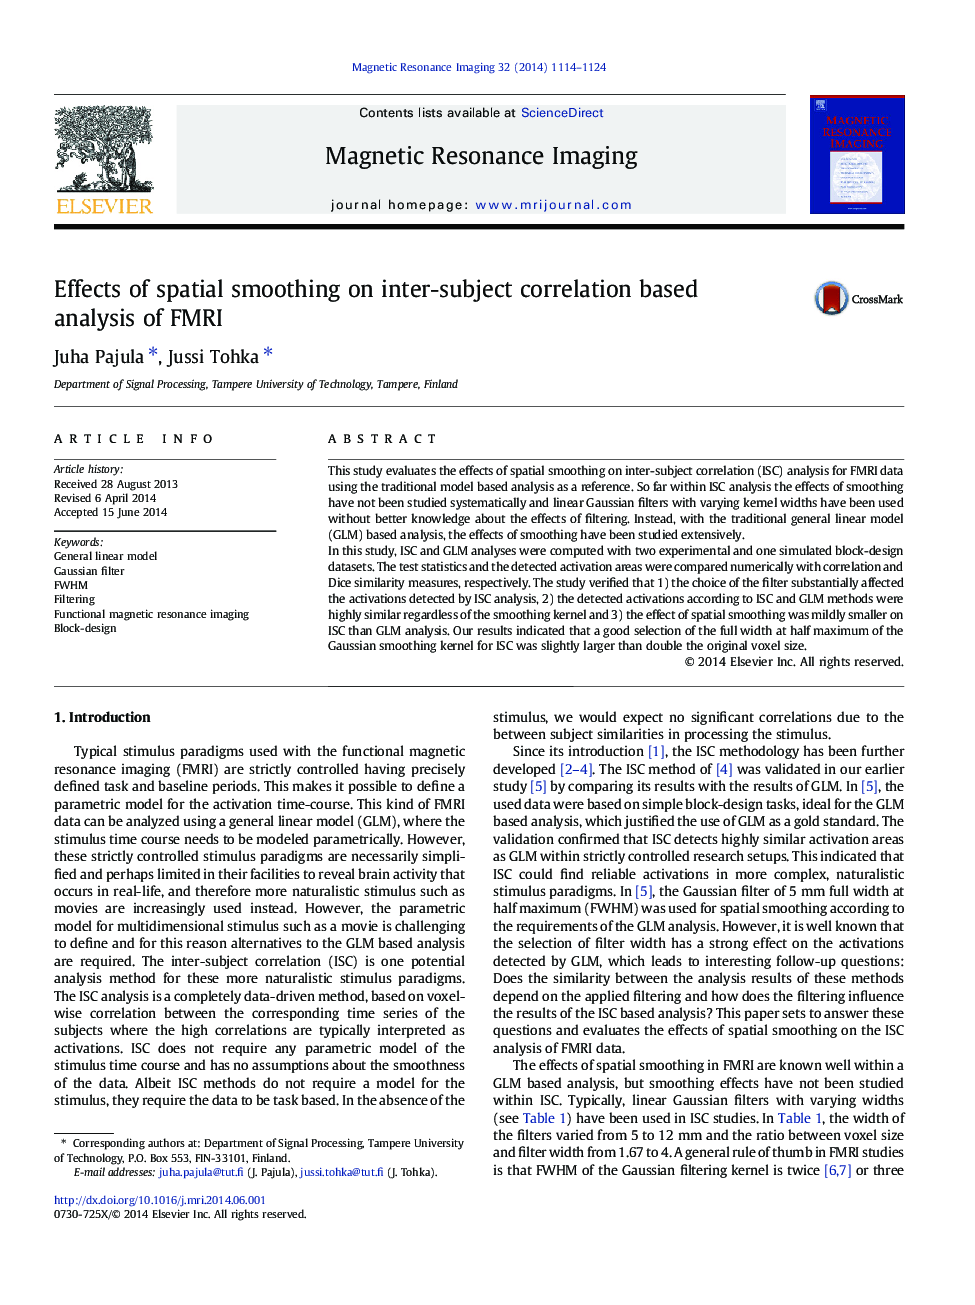 Effects of spatial smoothing on inter-subject correlation based analysis of FMRI